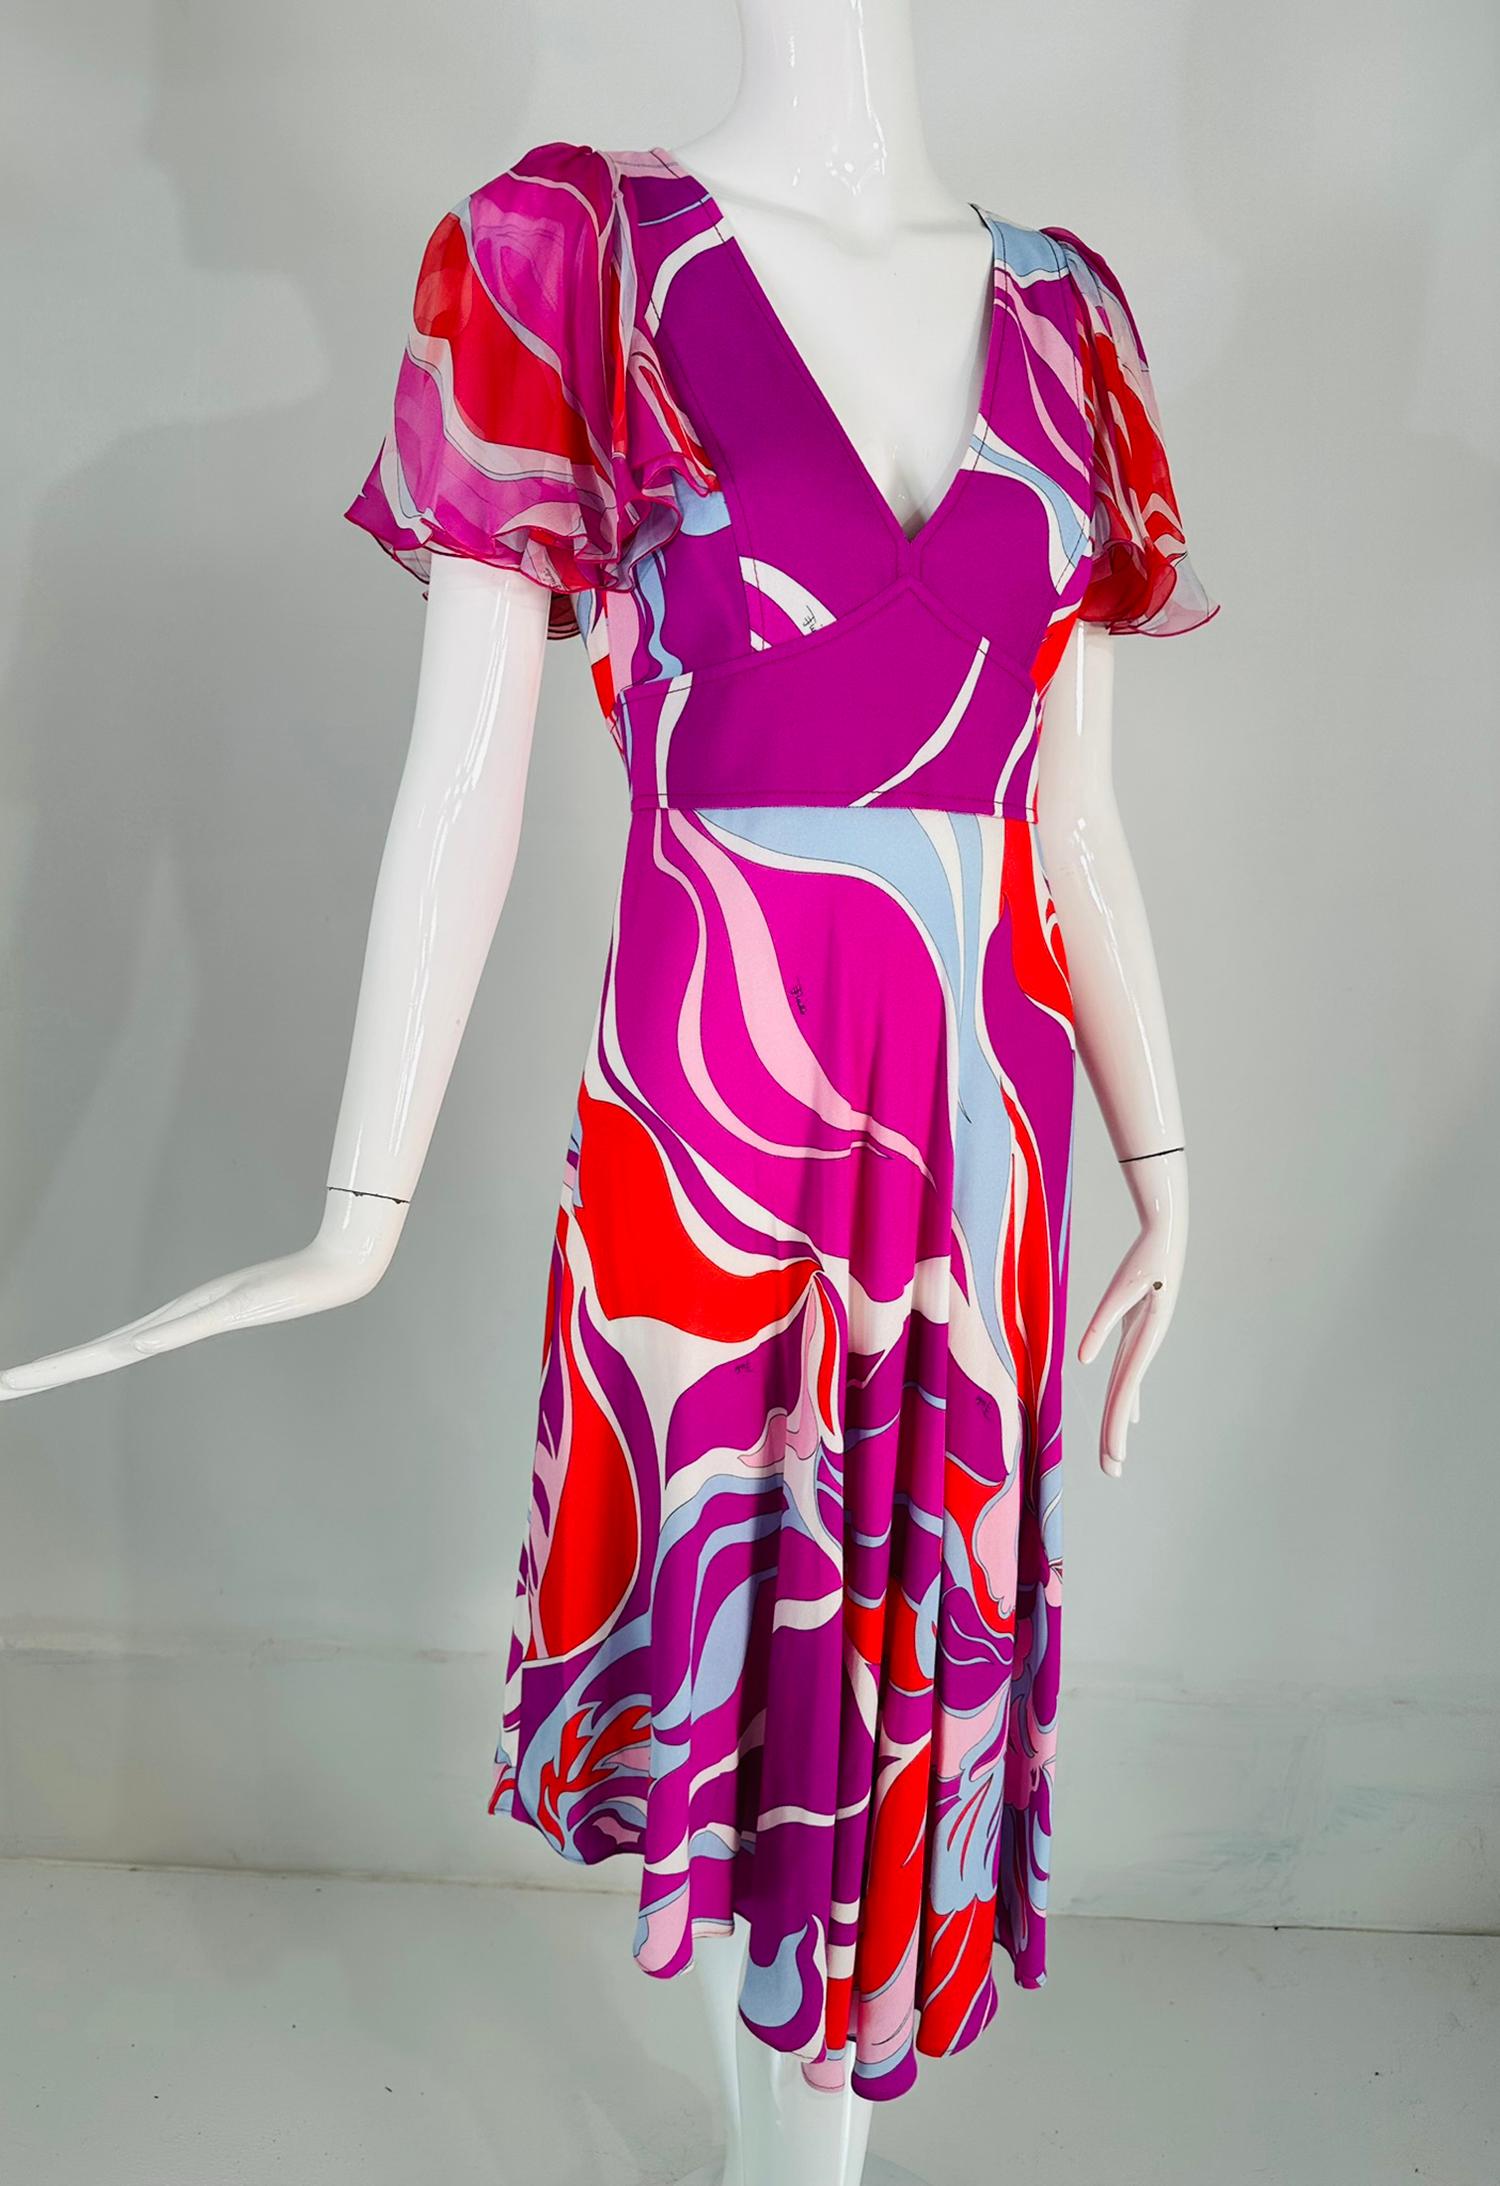 Emilio Pucci V neck ruffle chiffon sleeve bias cut asymmetrical hem skirt dress marked size 6US. Bright pink, orange, soft pin, pale blue & white dress with a fitted bodice and a bias cut skirt that dips at the hem front & back. Unlined. Marked size